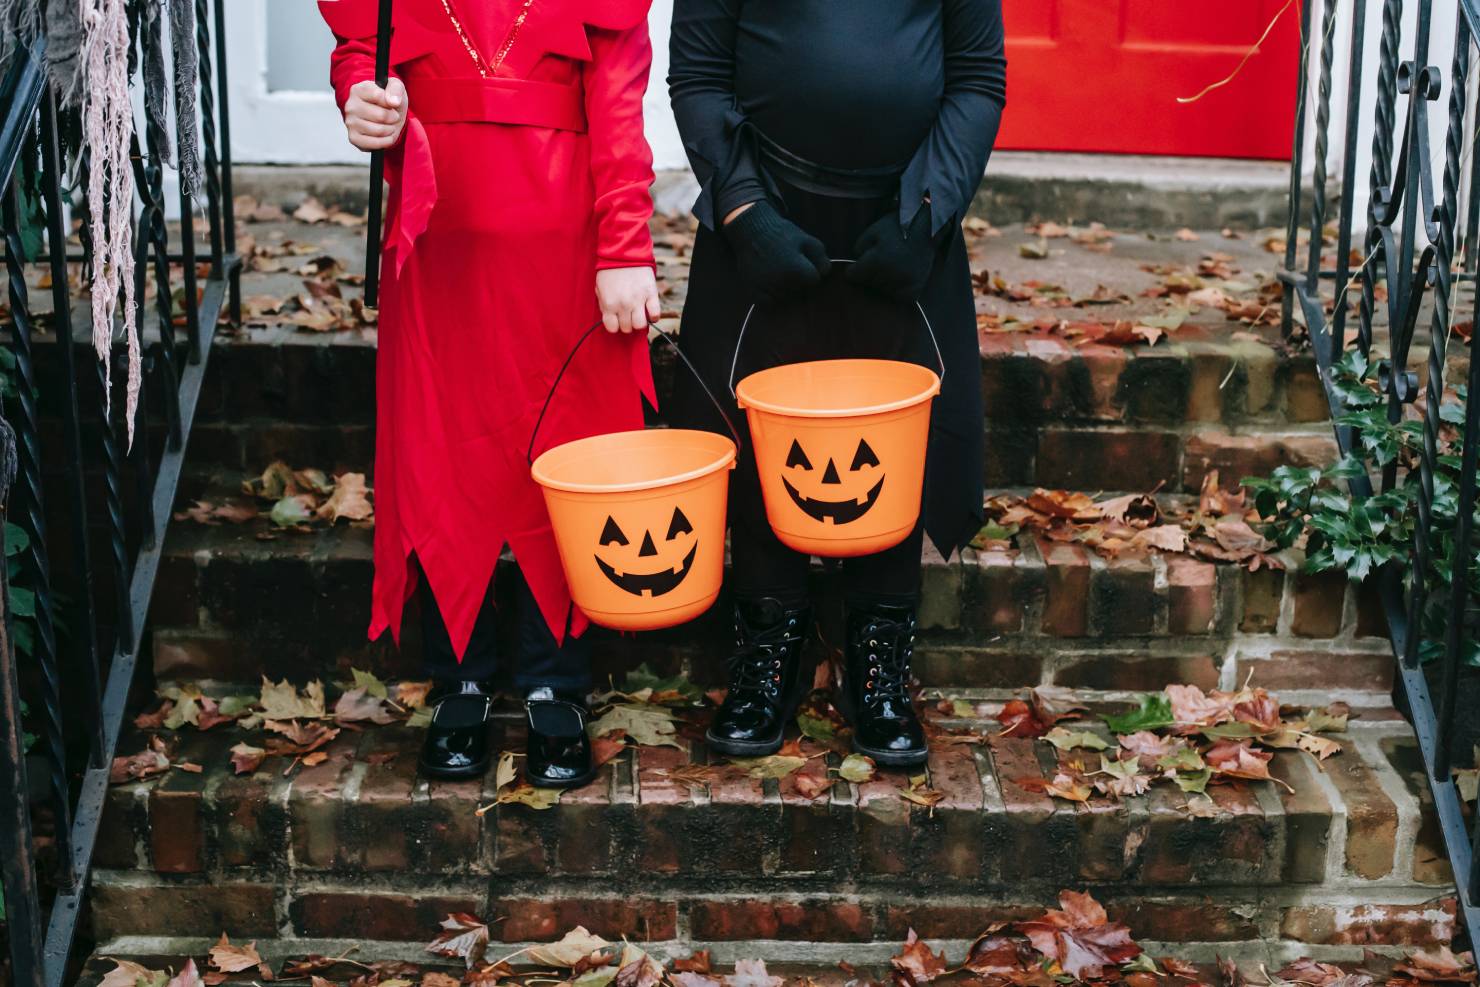 photo of a young girl in a red costume next to a boy wearing a black costume, both holding pumpkin buckets on front door steps, should christians celebrate halloween